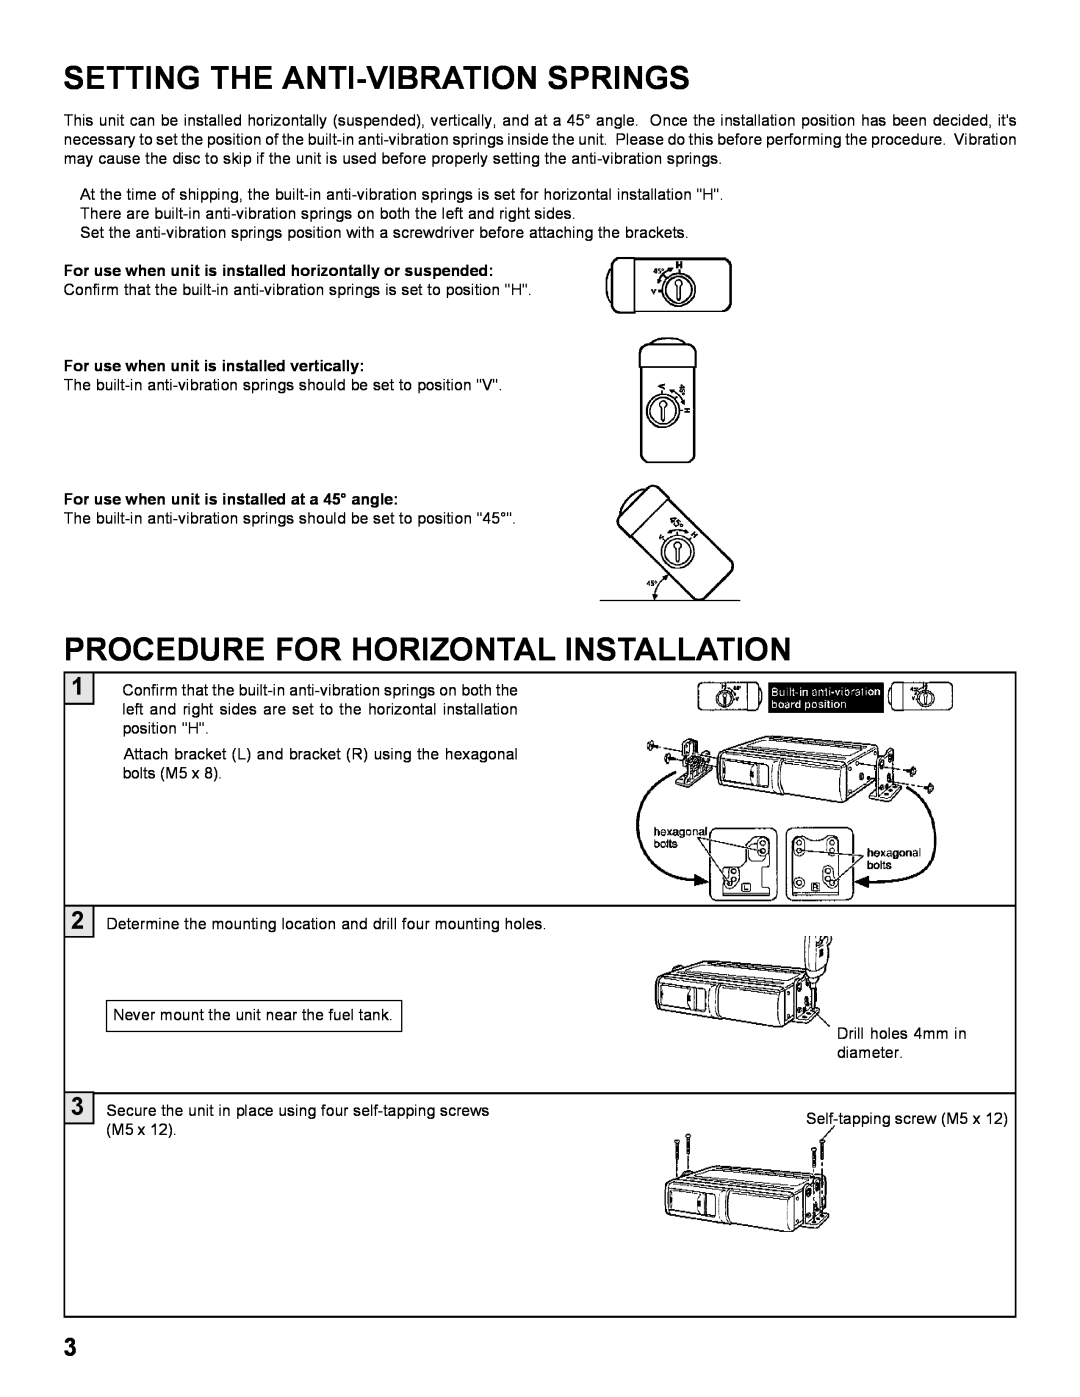 Audiovox SP-6CD installation manual Setting The Anti-Vibrationsprings, Procedure For Horizontal Installation 